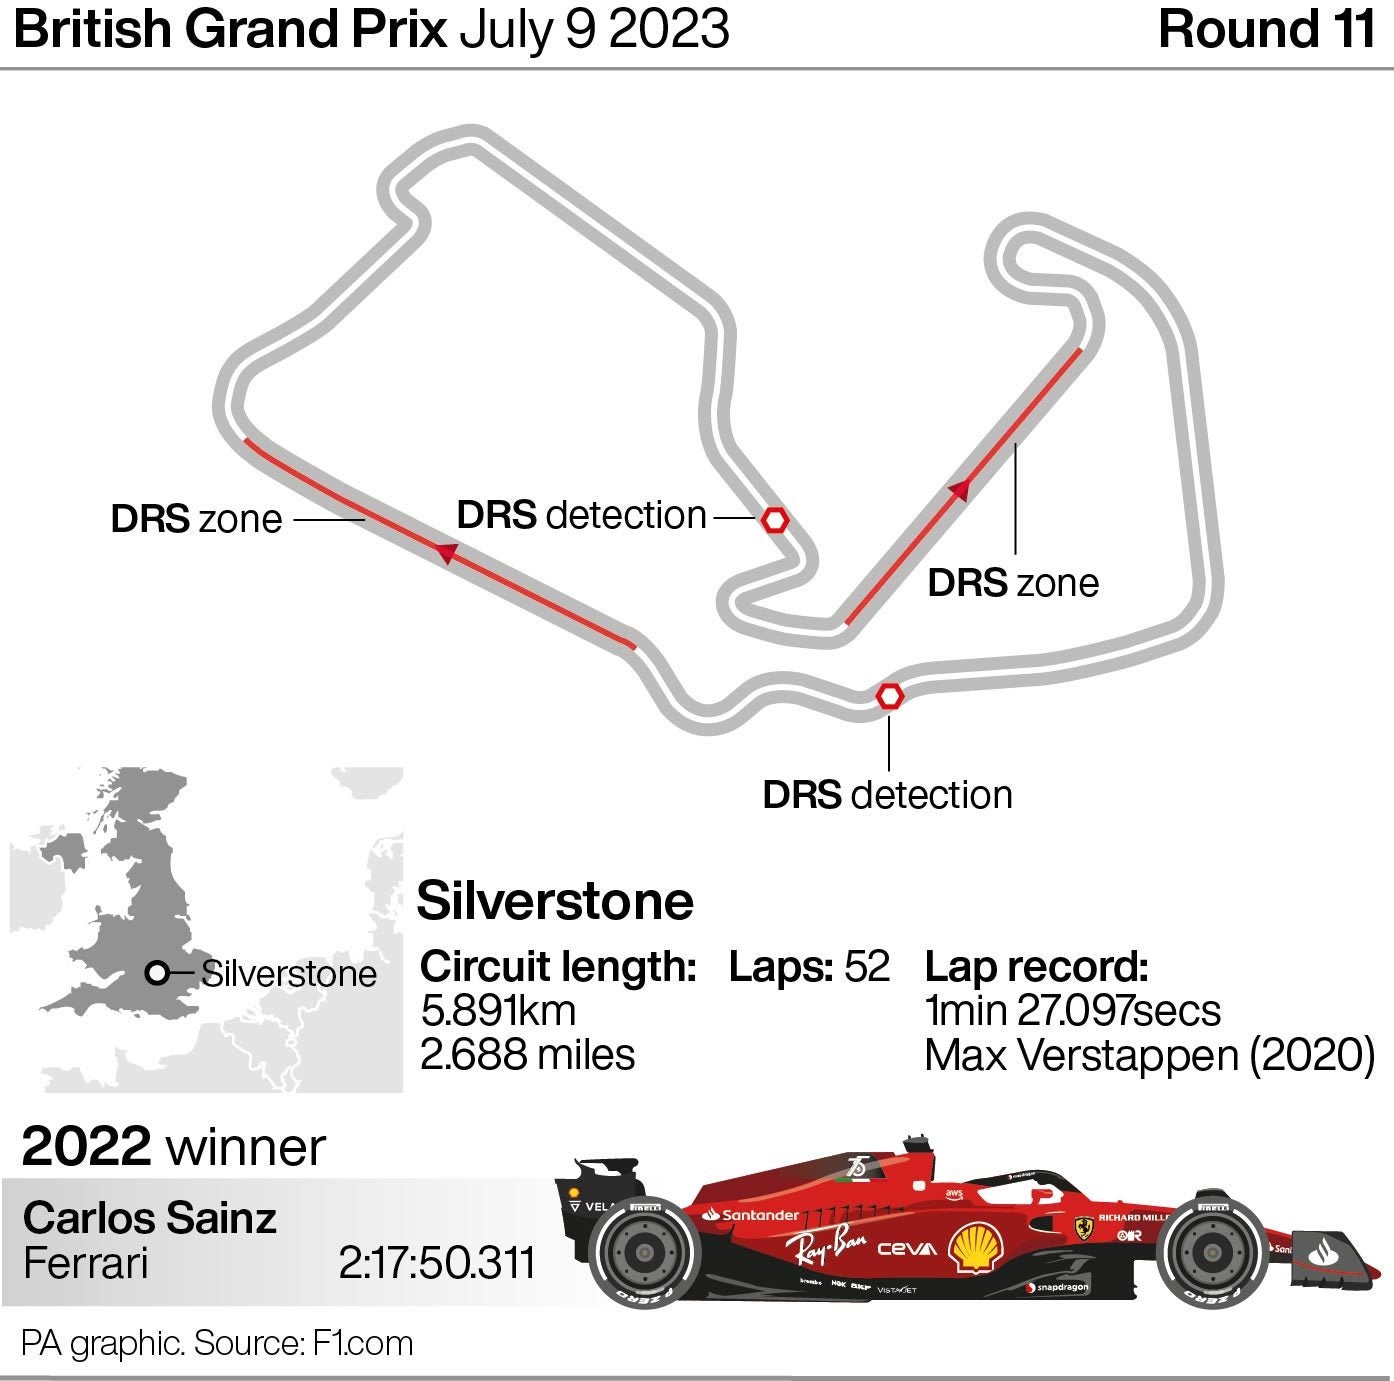 pa ready, lando norris, max verstappen, silverstone, northamptonshire, lewis hamilton, british, royal air force, lewis, aintree, lando norris’ lap guide to world-famous silverstone ahead of british grand prix